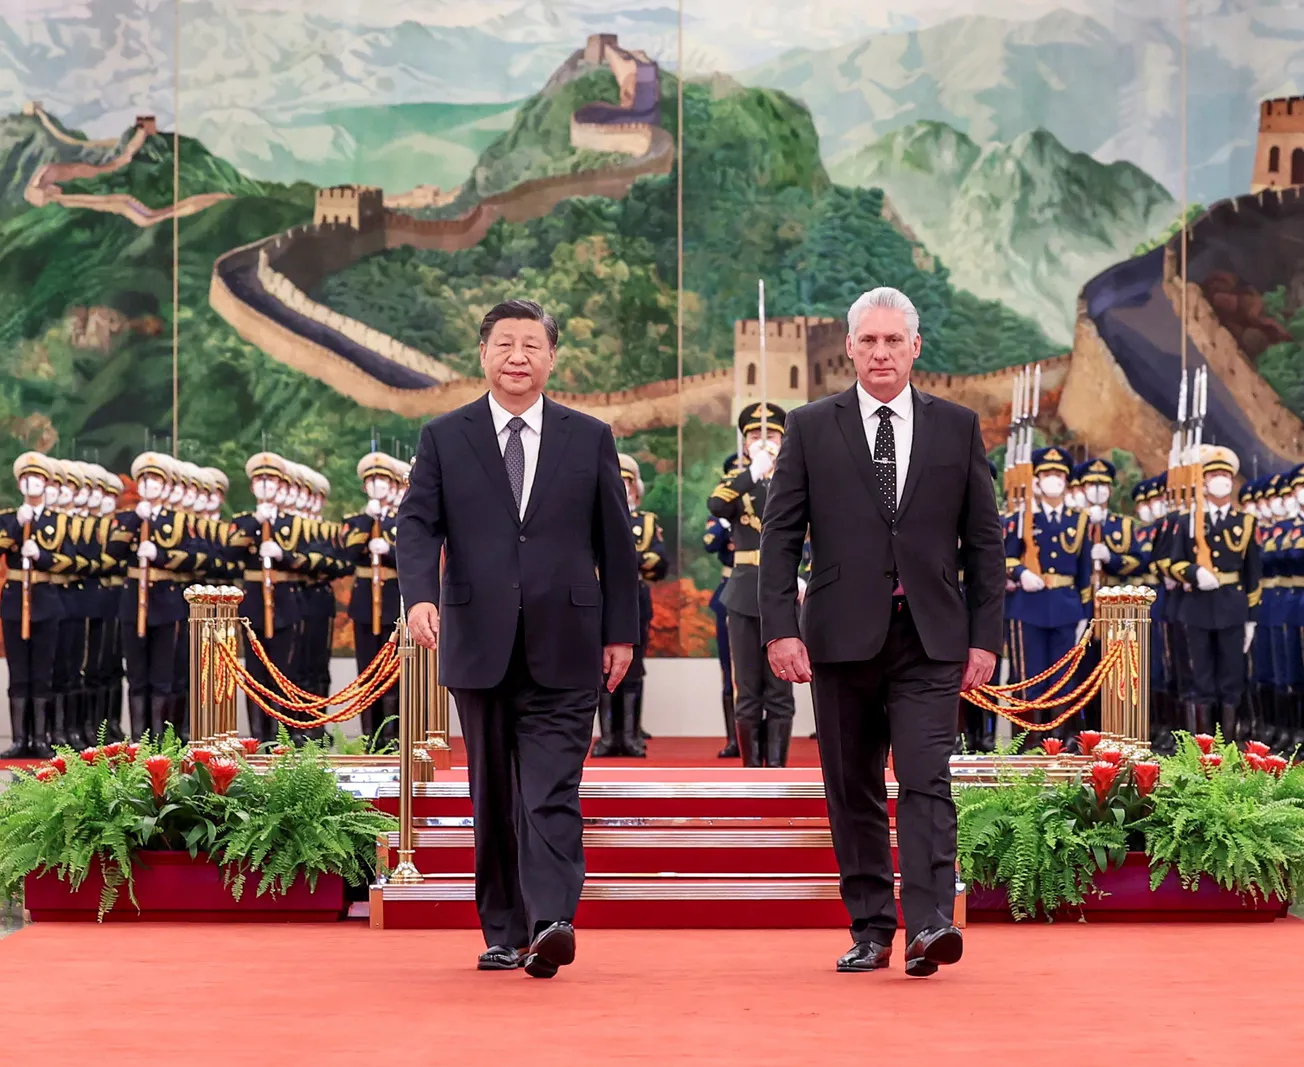 China Seeks Toehold At The Doorstep Of The U.S.